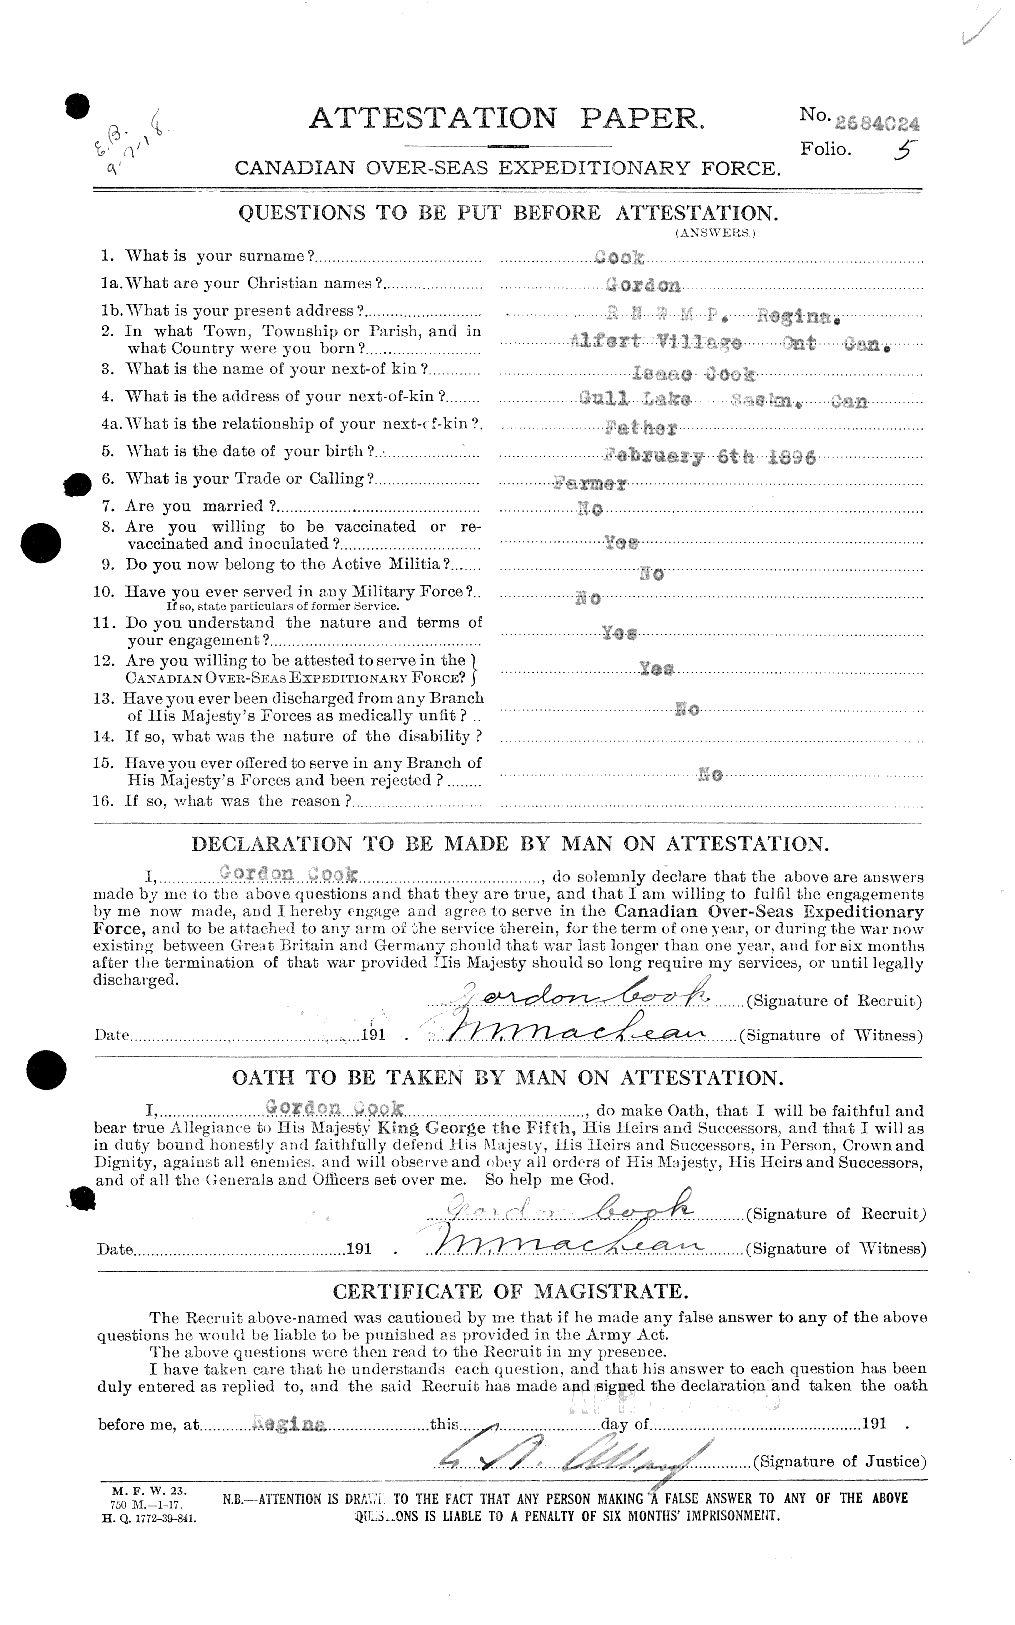 Personnel Records of the First World War - CEF 041438a